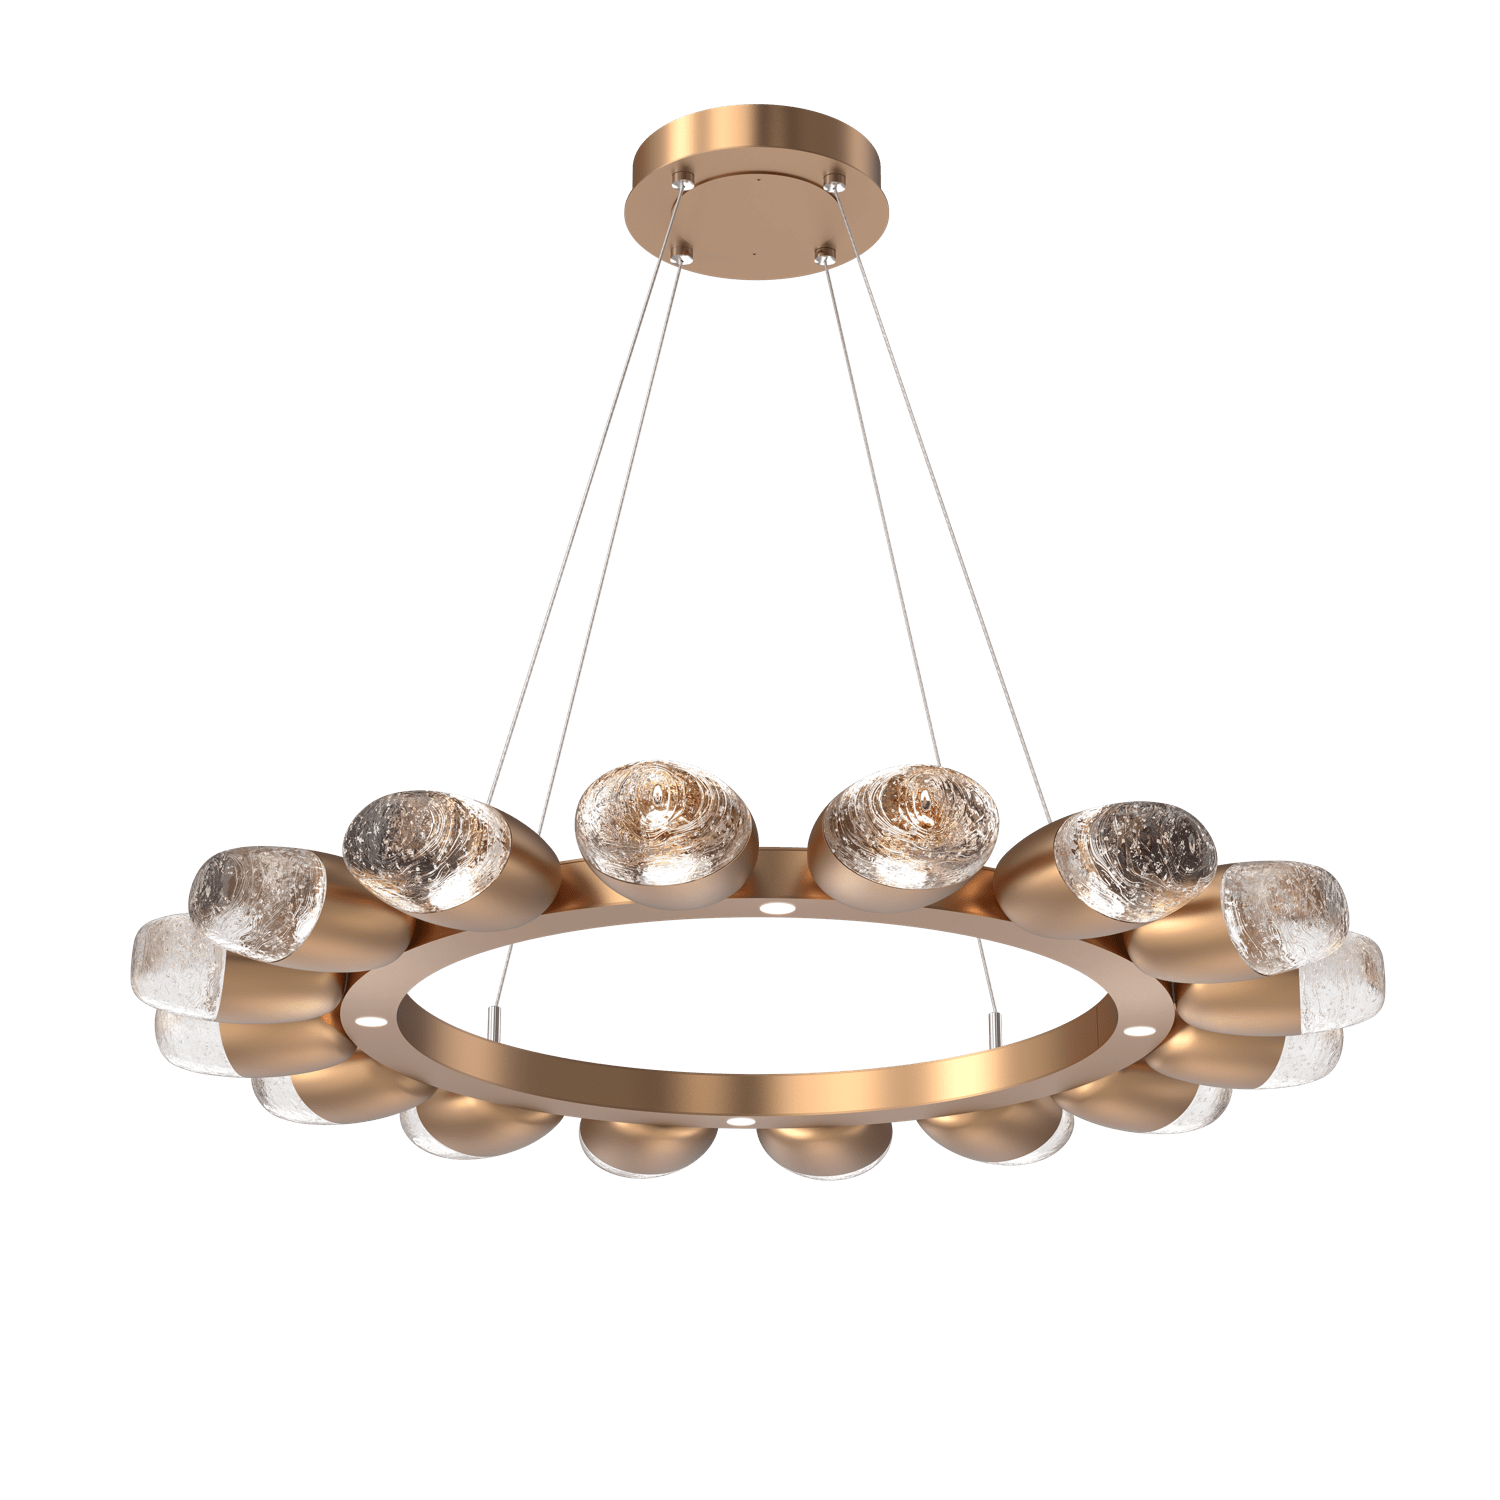 CHB0079-36-NB-Hammerton-Studio-Pebble-36-inch-radial-ring-chandelier-with-novel-brass-finish-and-clear-cast-glass-shades-and-LED-lamping